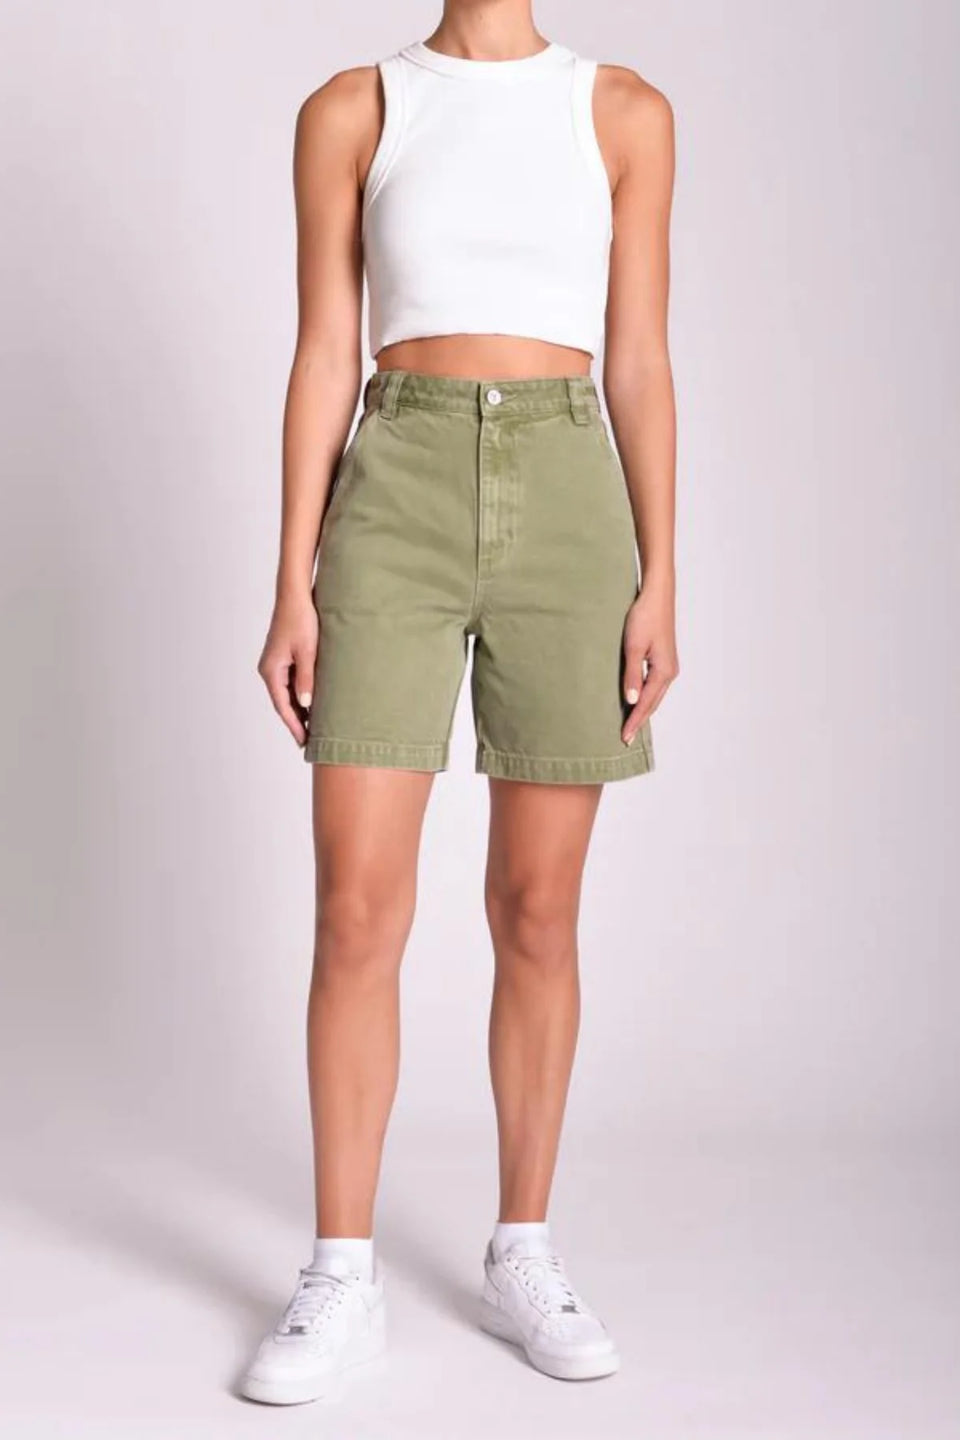 ABrand Carrie Carpenter Short - Faded Army